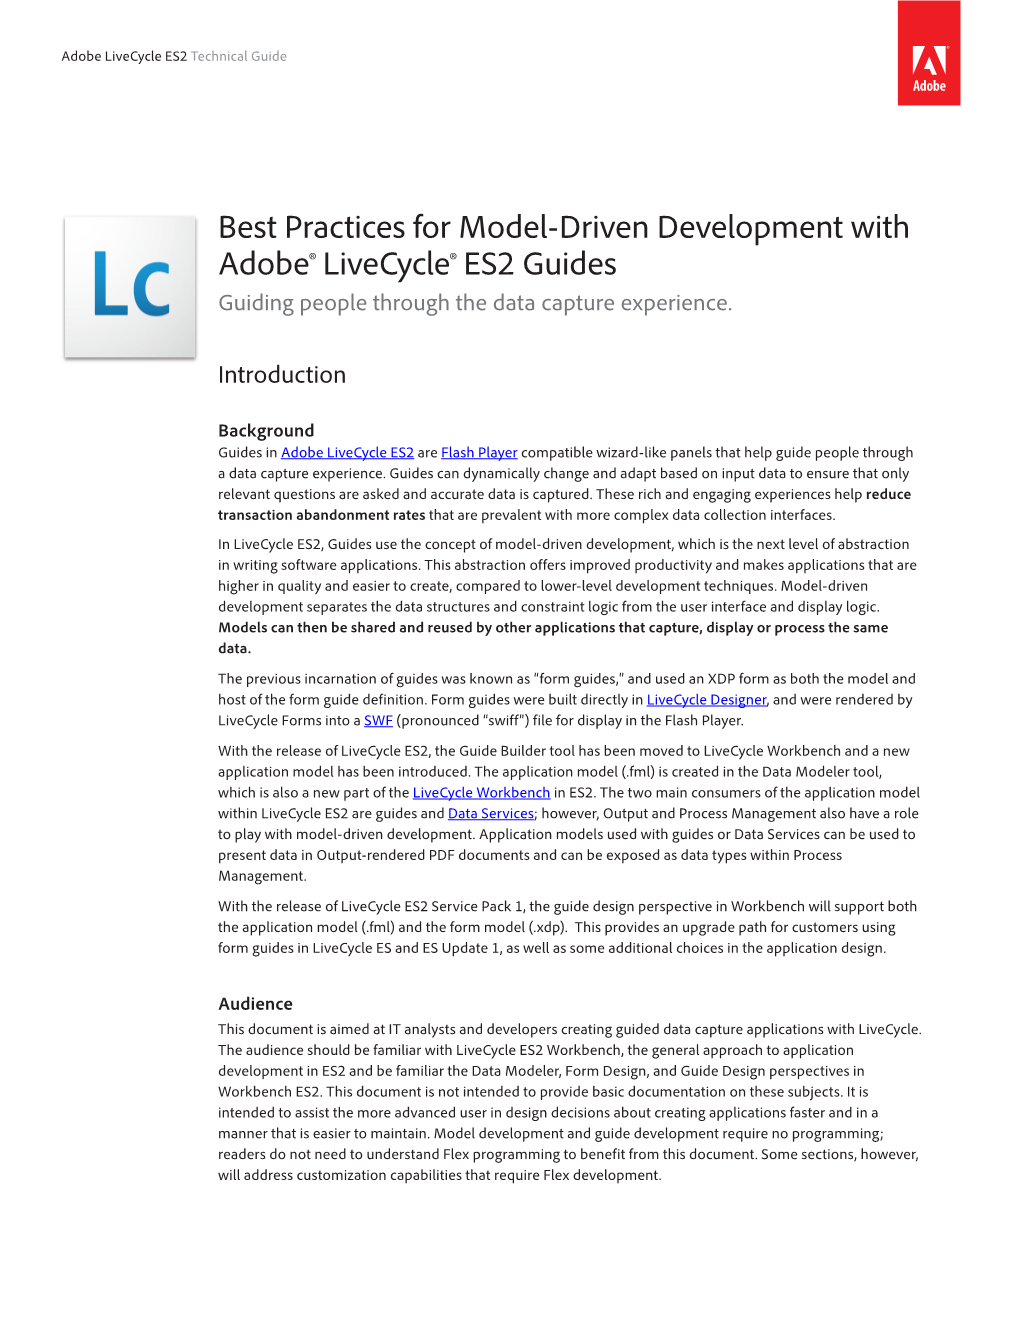 Best Practices for Model-Driven Development with Adobe® Livecycle® ES2 Guides Guiding People Through the Data Capture Experience